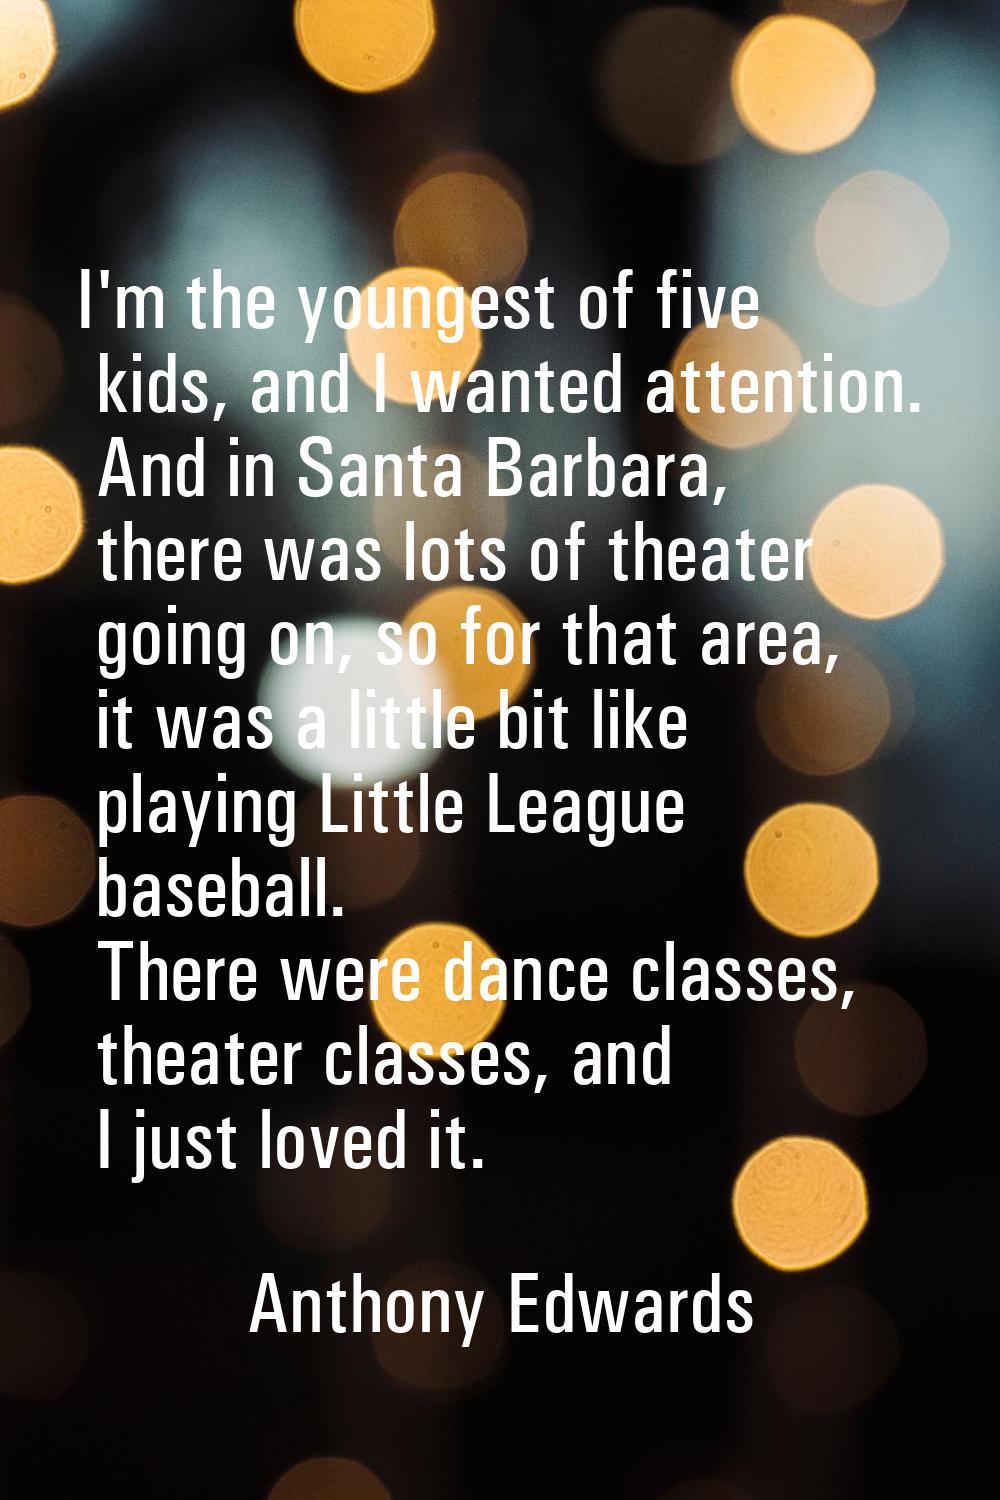 I'm the youngest of five kids, and I wanted attention. And in Santa Barbara, there was lots of thea